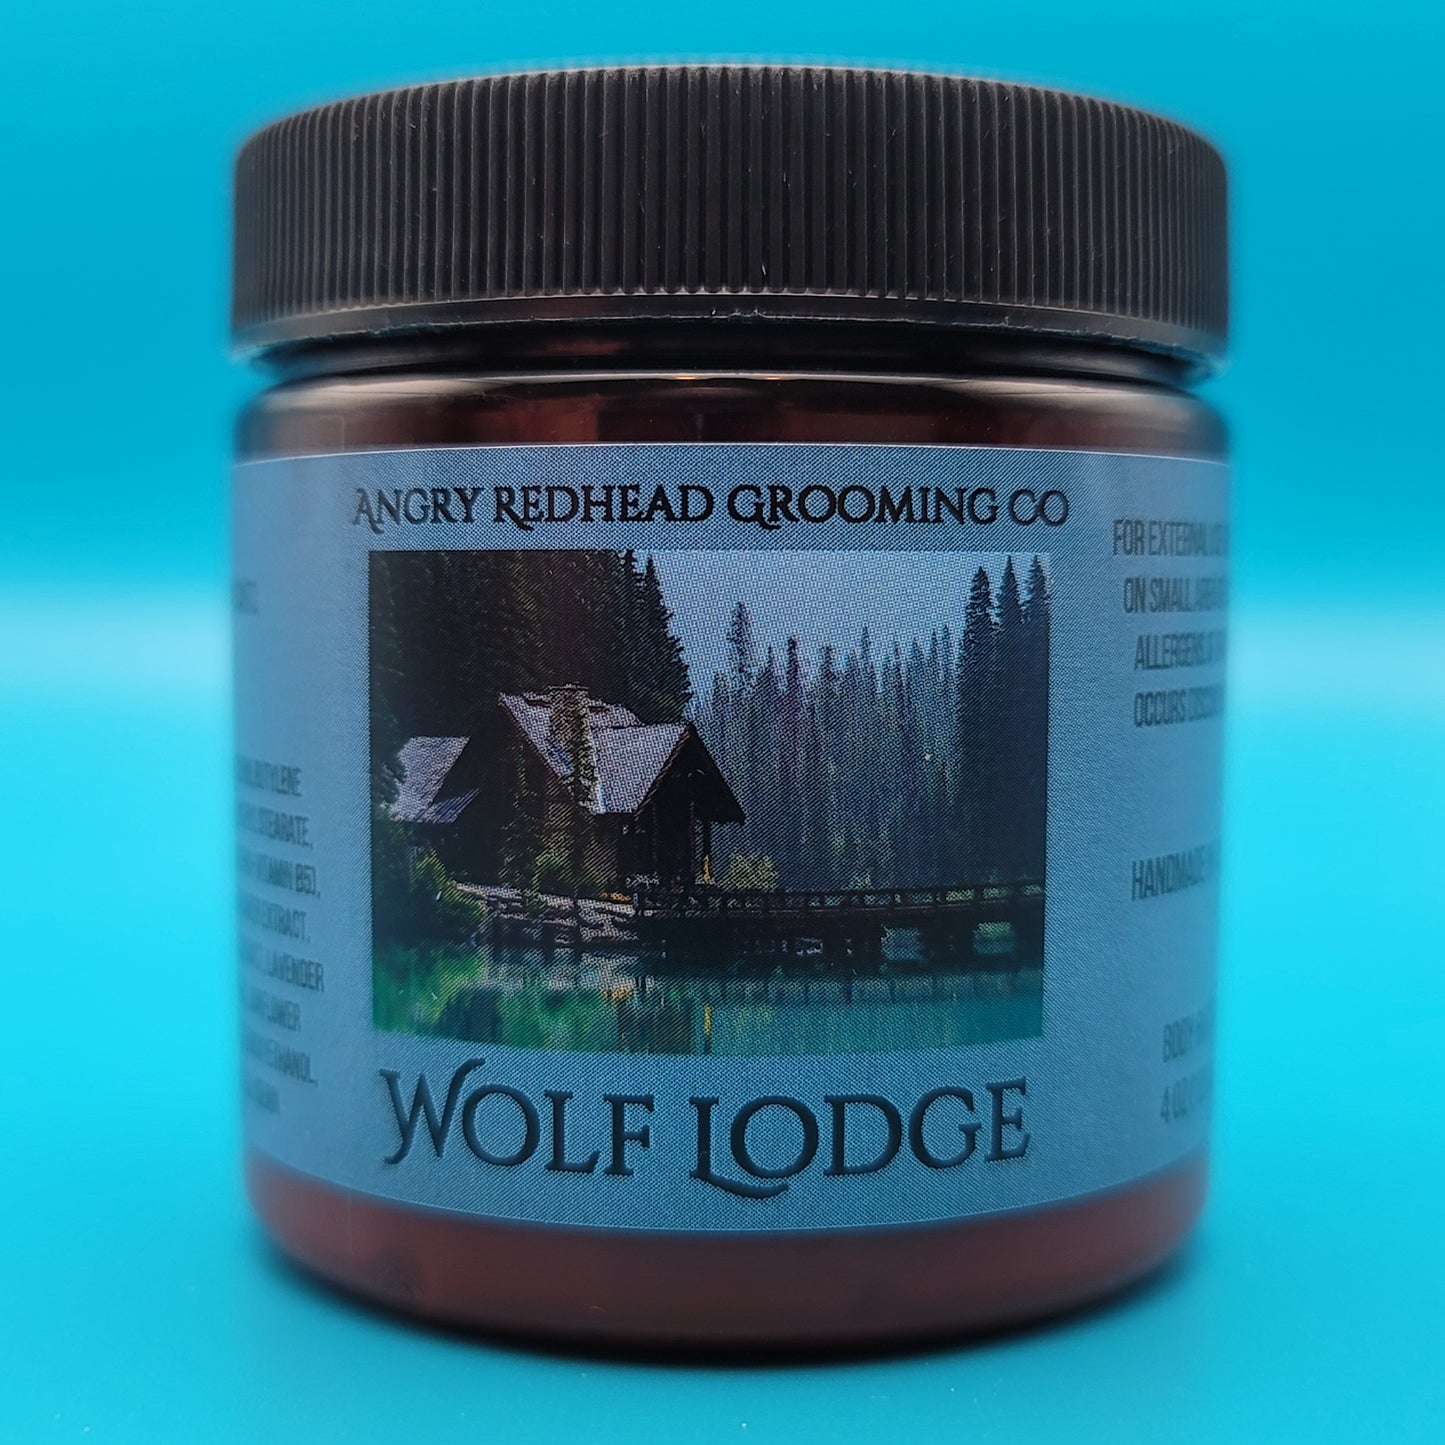 Wolf Lodge Body Butter by Angry Redhead Grooming Co - angryredheadgrooming.com